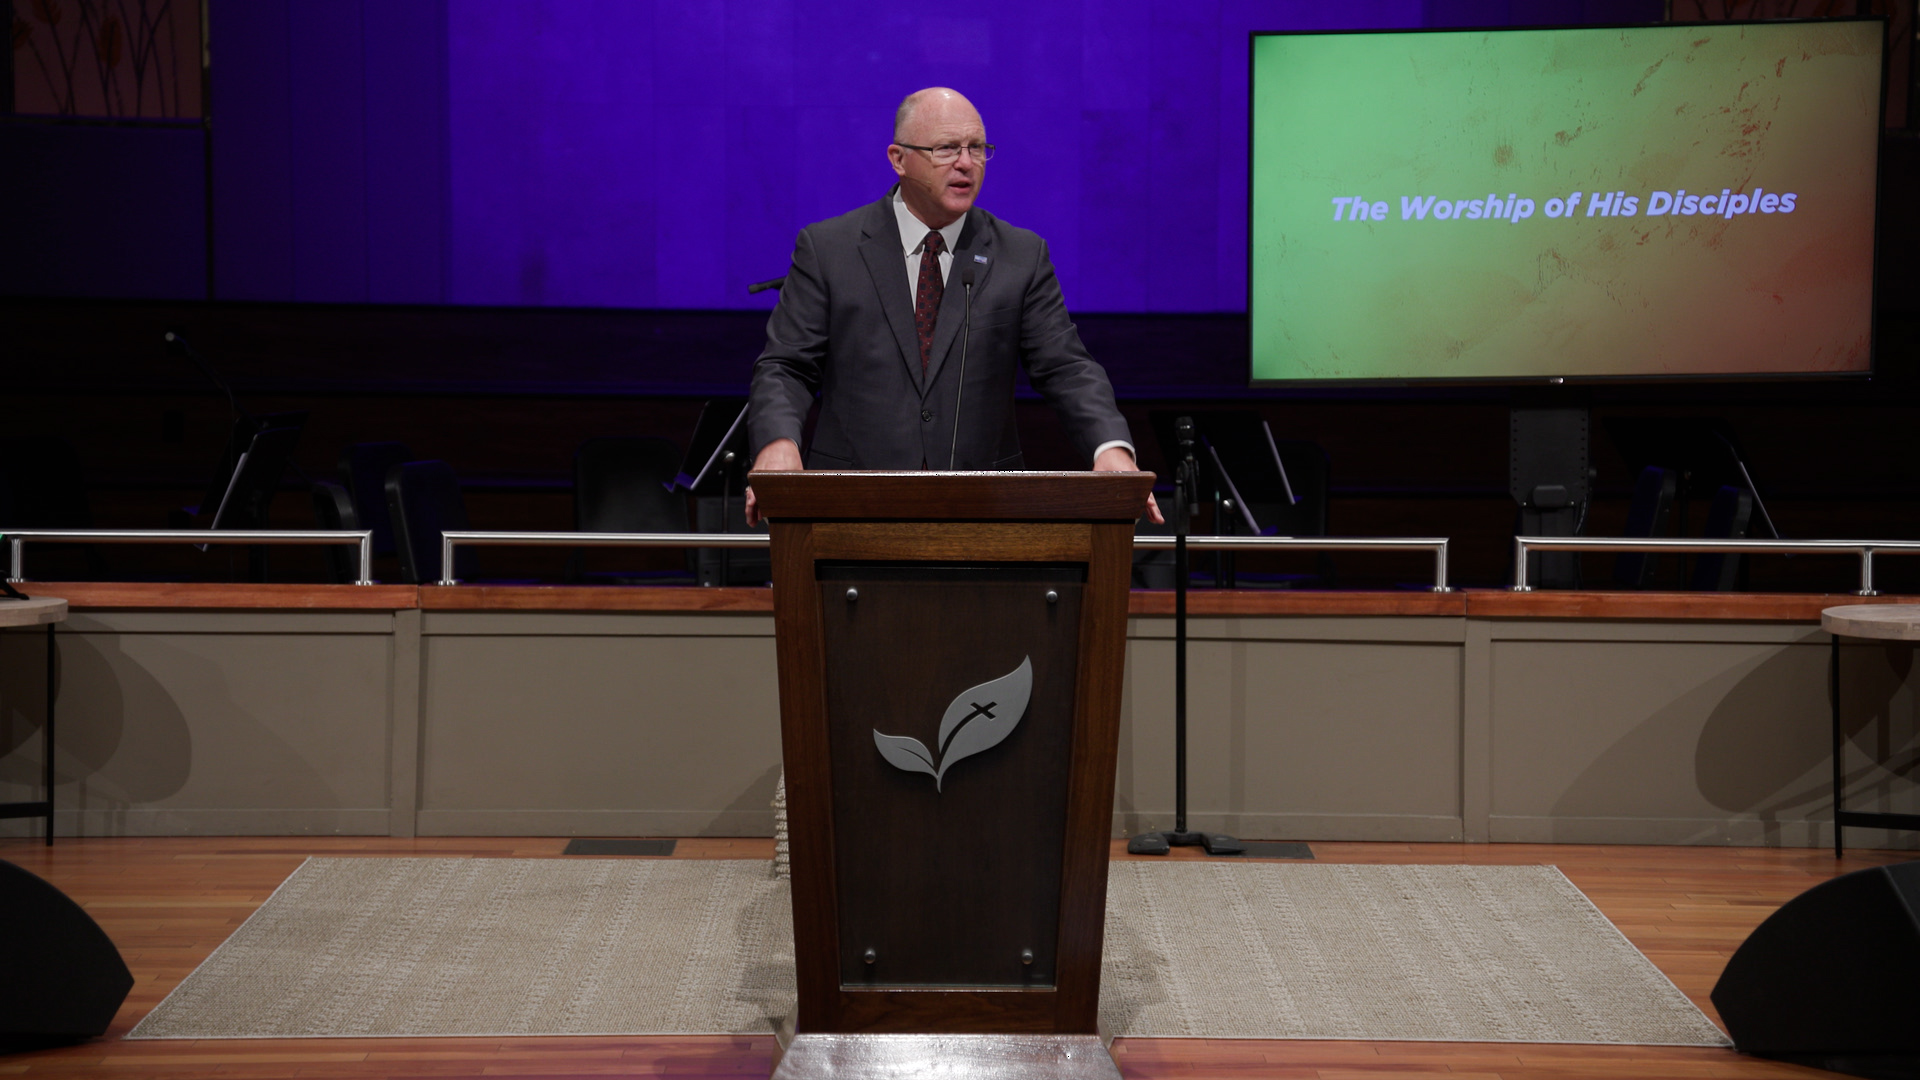 Pastor Paul Chappell: After the Resurrection